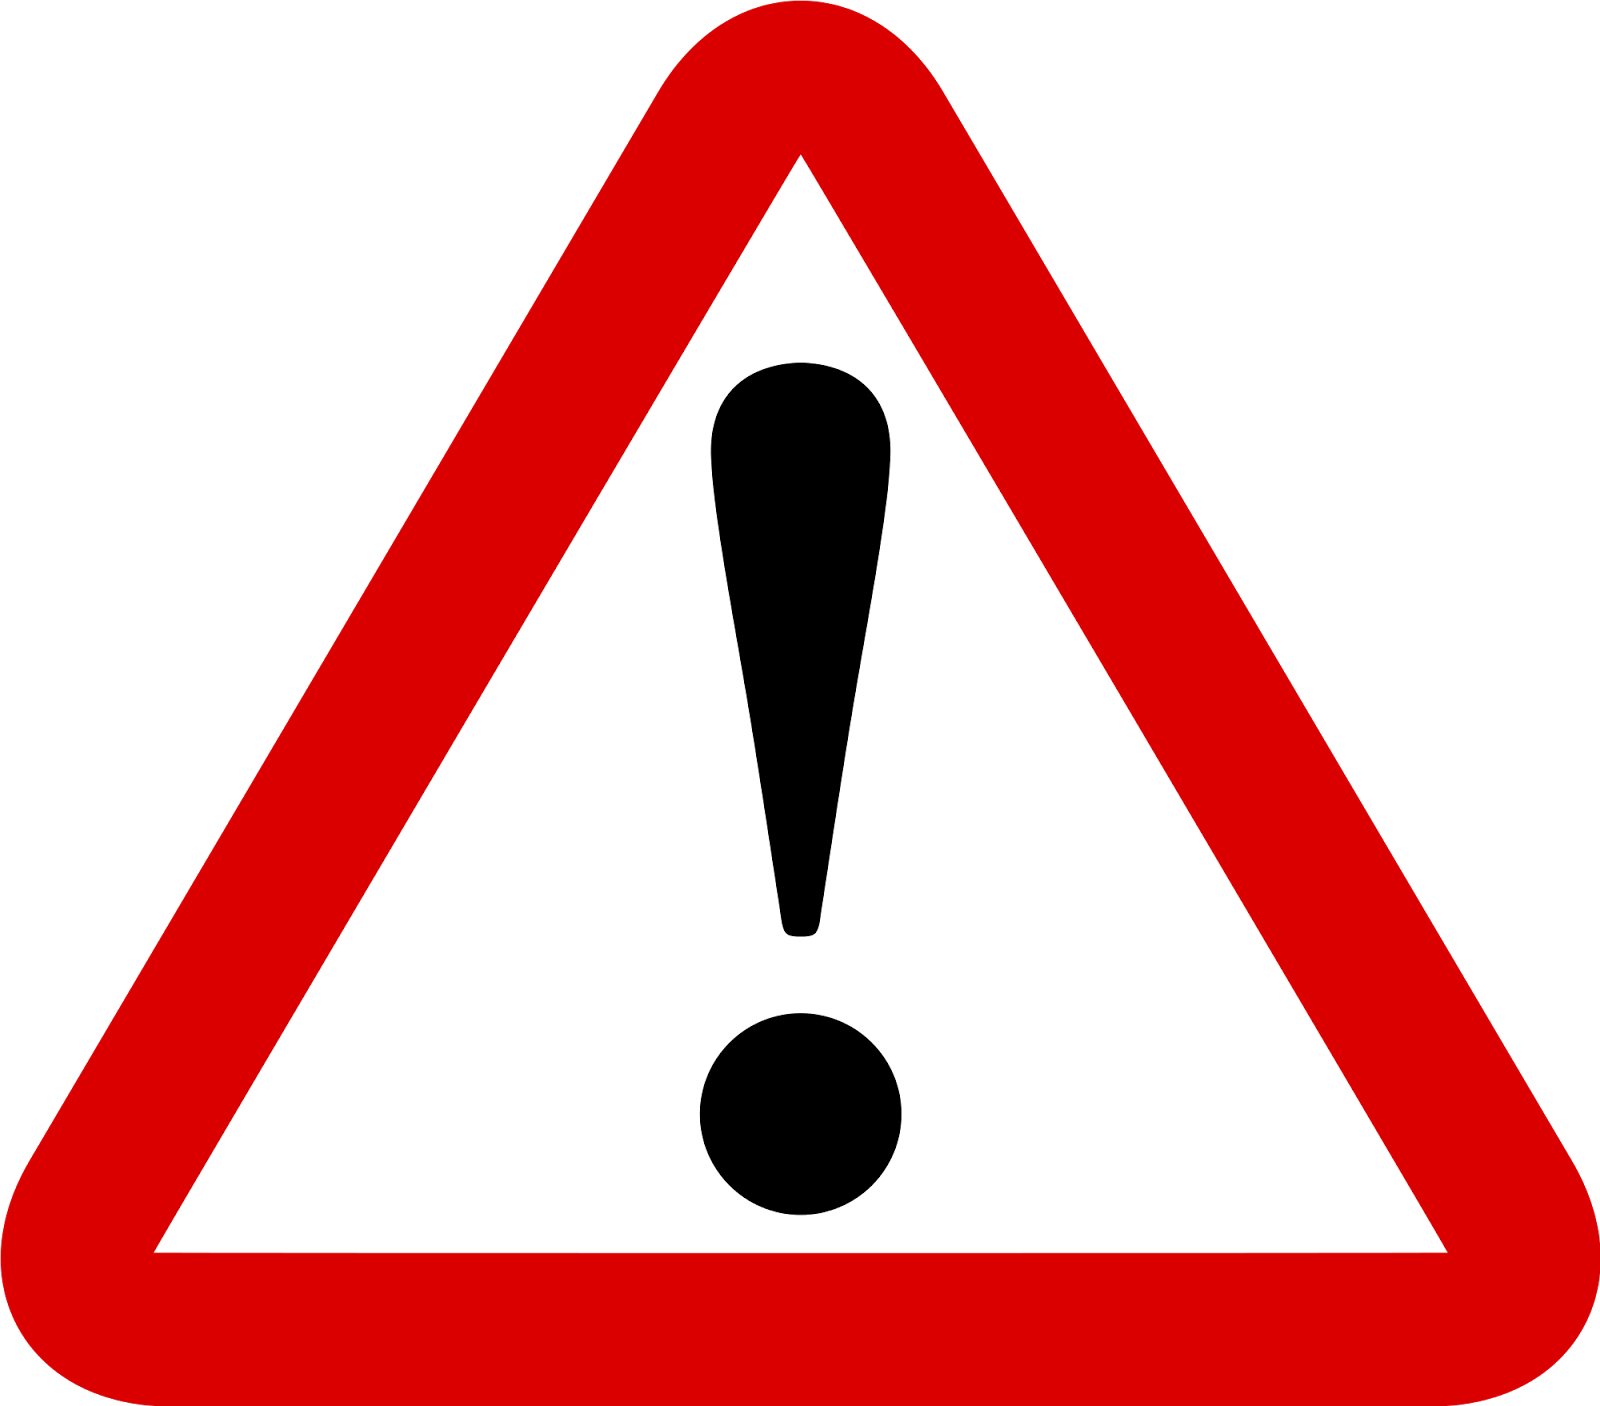 kisspng-exclamation-mark-computer-icons-warning-sign-clip-exclamation-mark-5b125a6138f872.5570276615279294412334.png